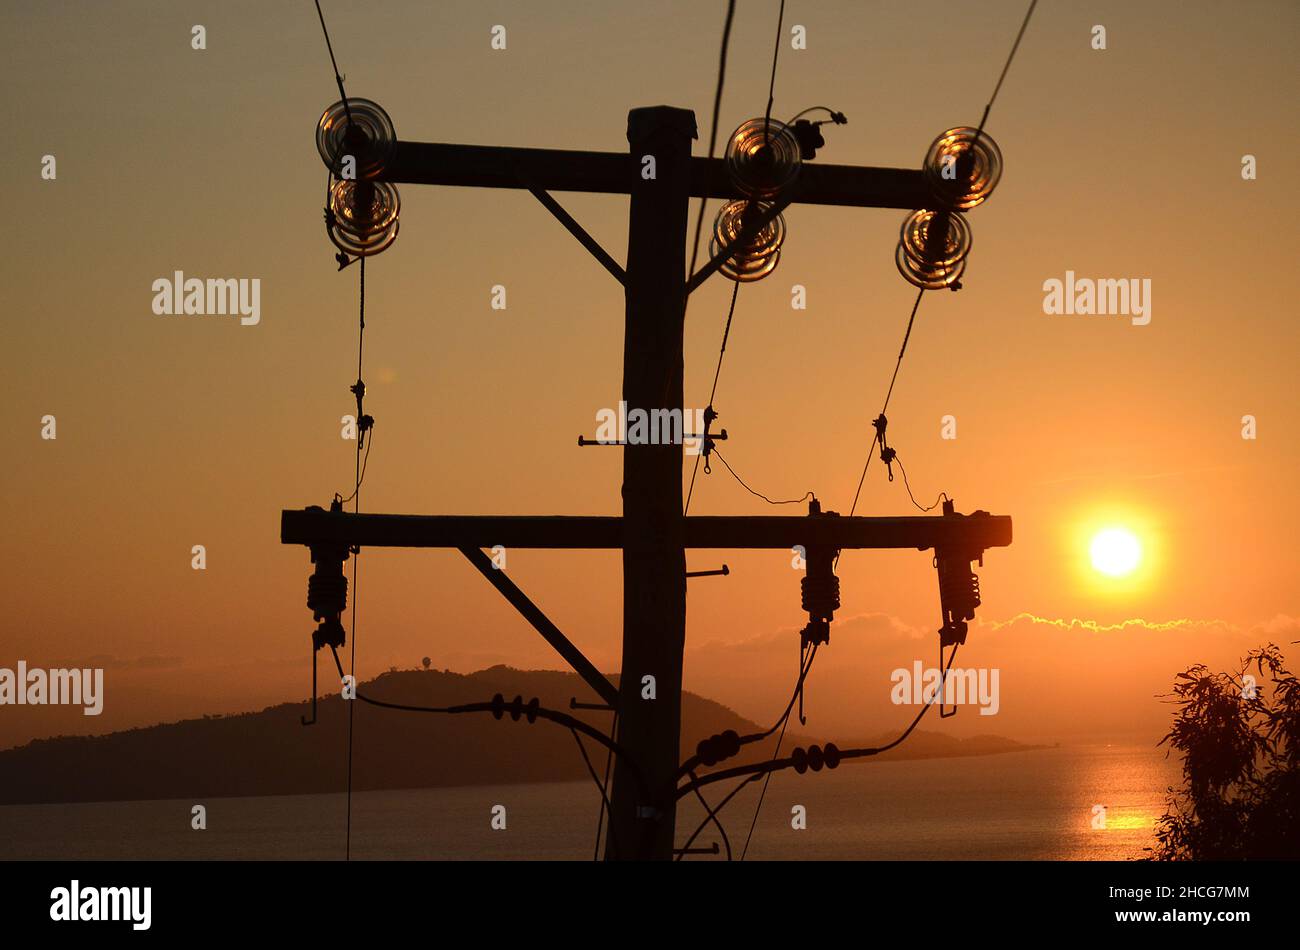 electric power lines at sunset Stock Photo